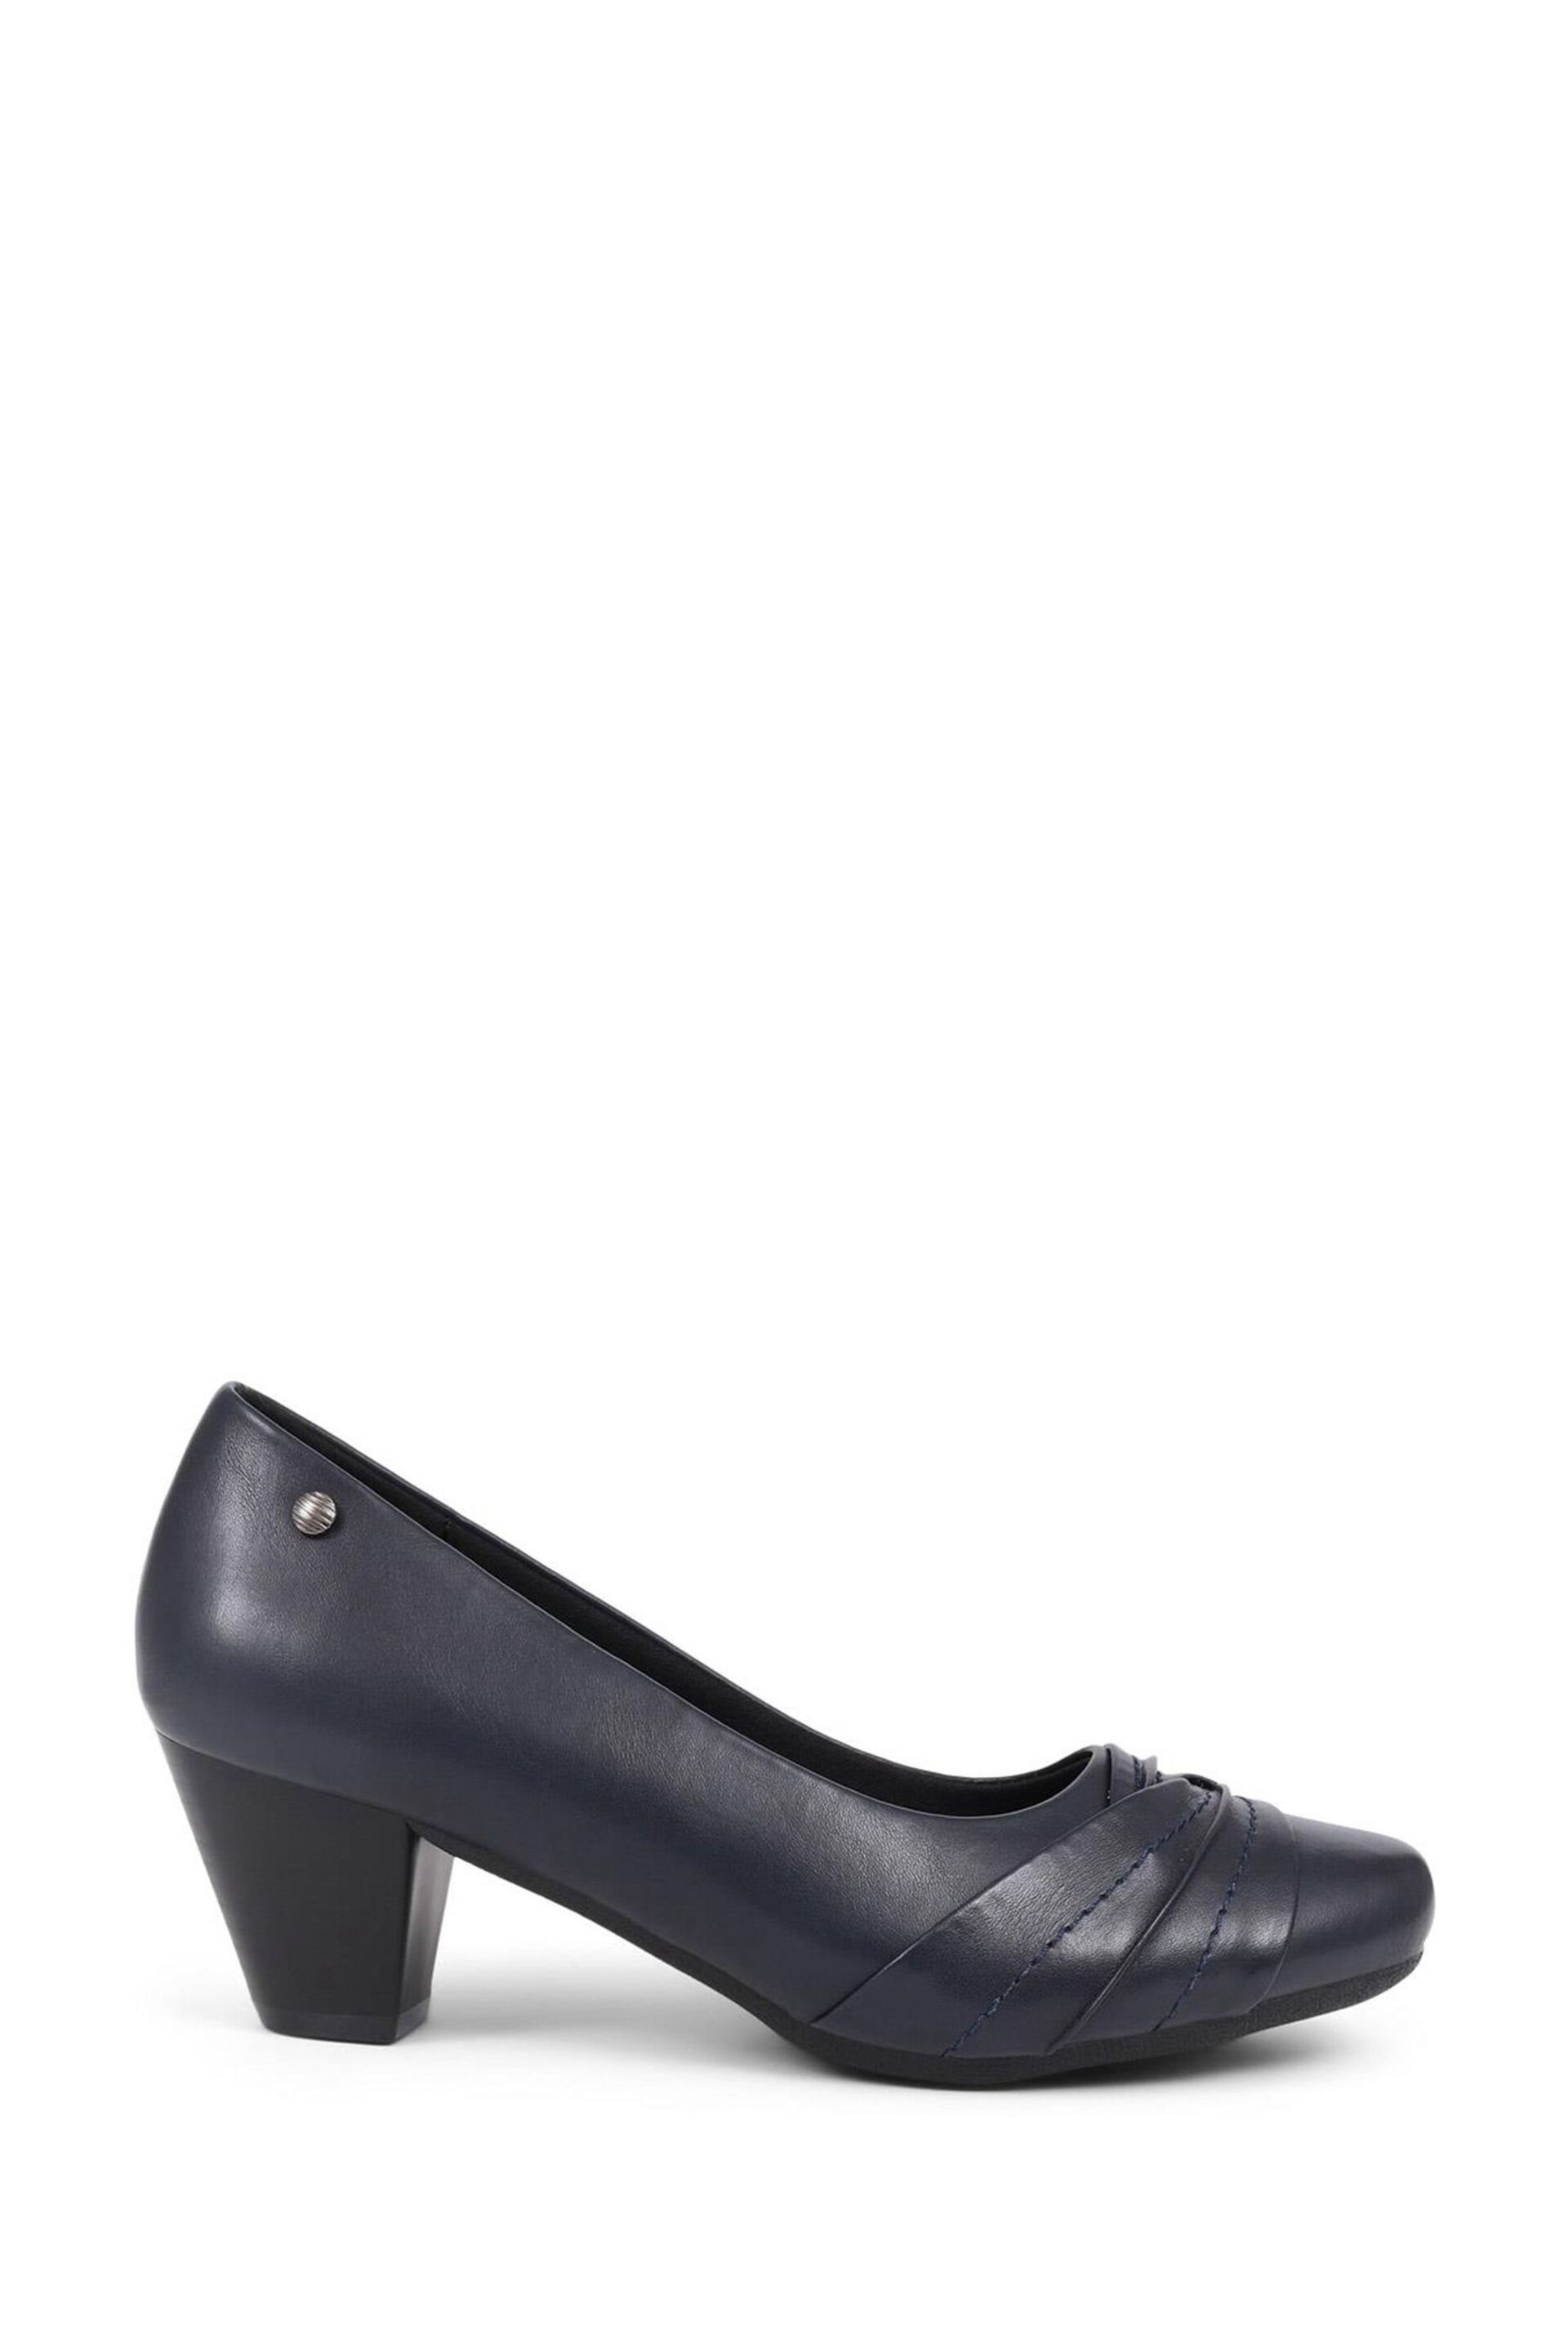 Pavers Navy Pavers Low Heeled Court Shoes - Image 1 of 5